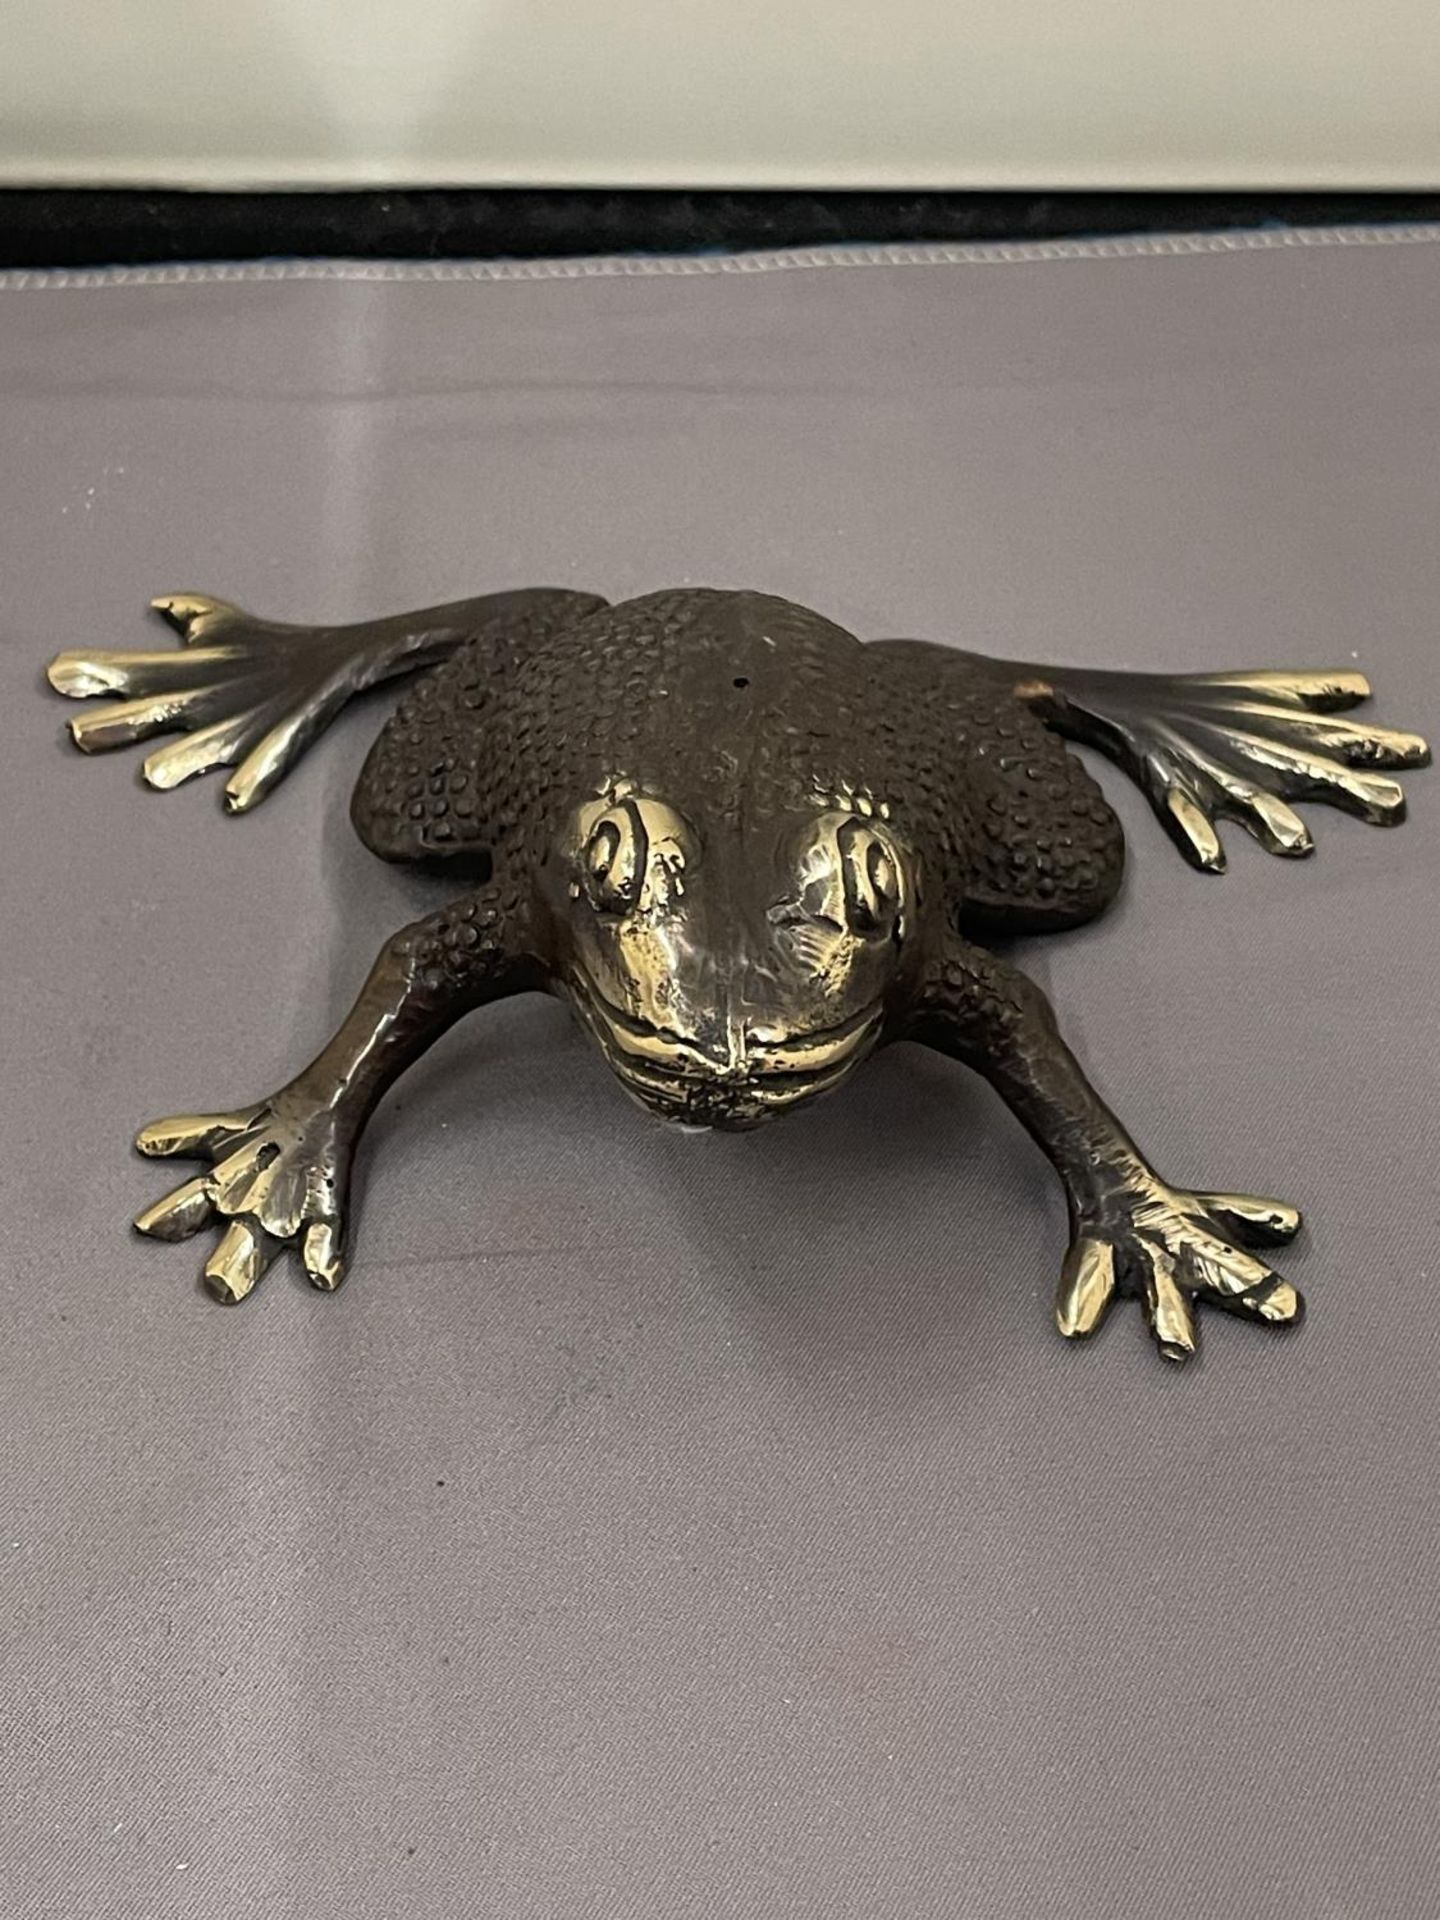 A BRONZE FIGURE OF A FROG - Image 6 of 6